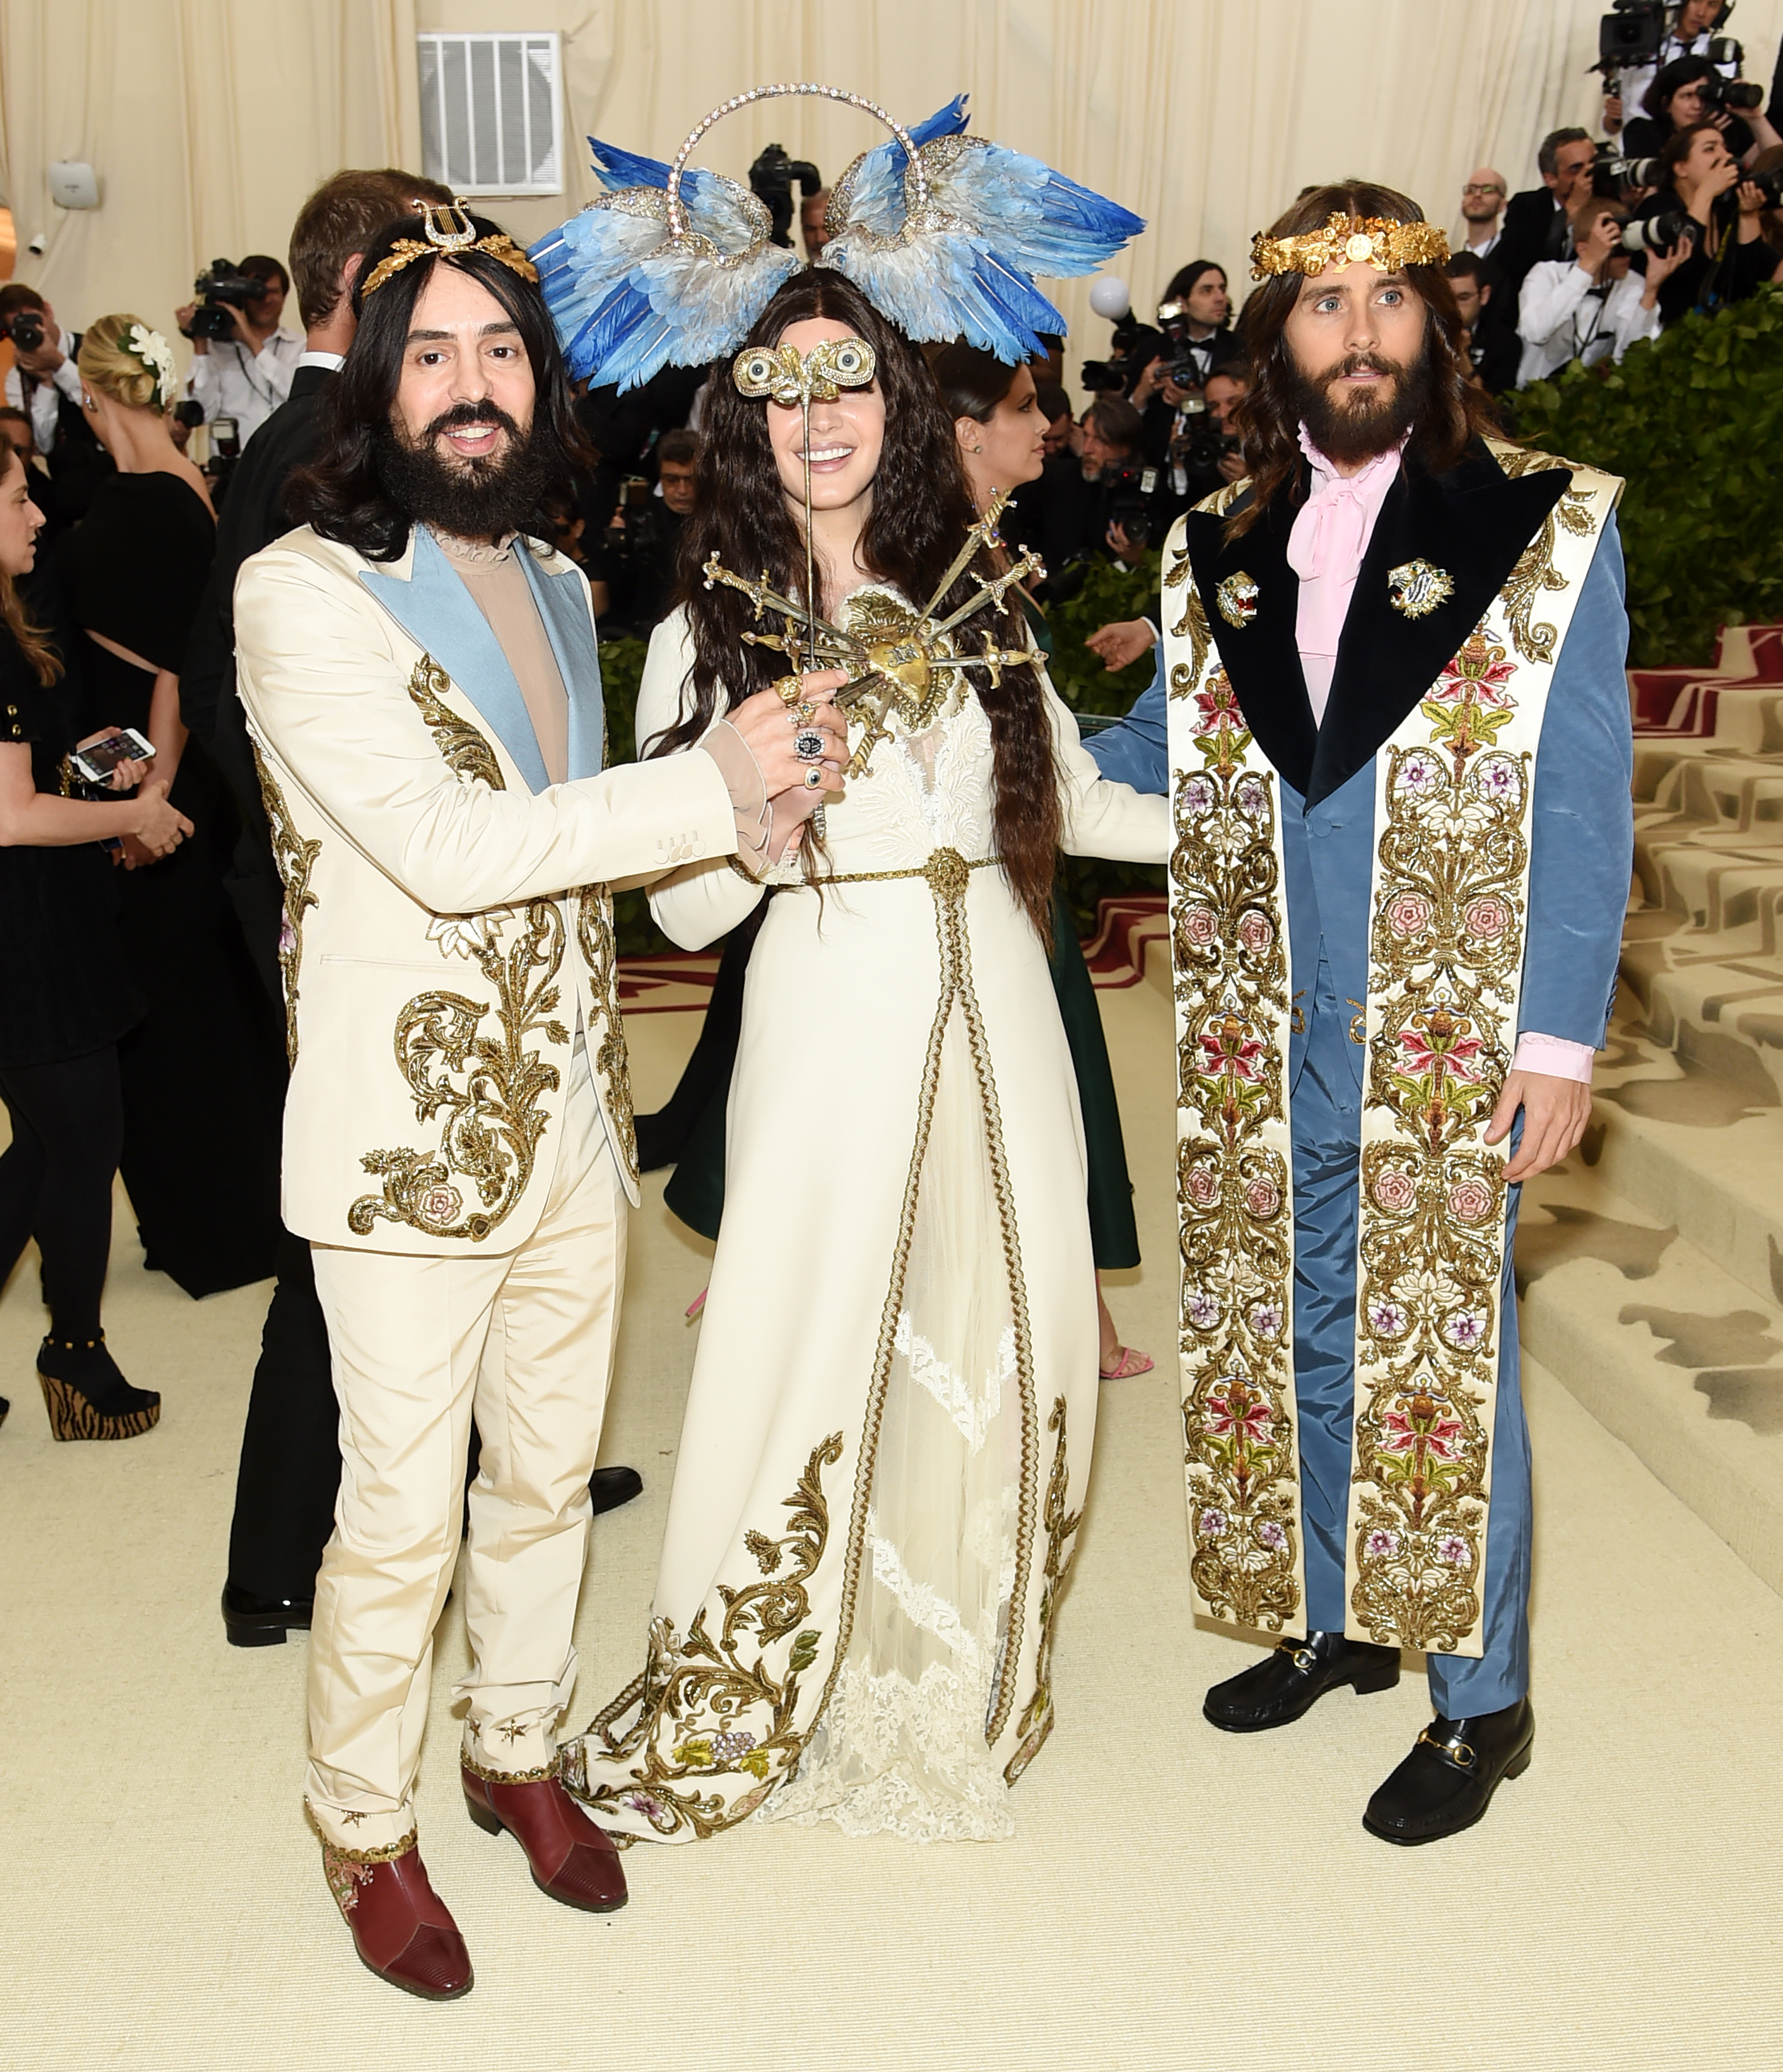 NEW YORK, NY - MAY 07: Alessandro Michele, Lana Del Rey and Jared Leto attend the Heavenly Bodies: Fashion & The Catholic Imagination Costume Institute Gala at The Metropolitan Museum of Art on May 7, 2018 in New York City. (Photo by Jamie McCarthy/Getty Images)